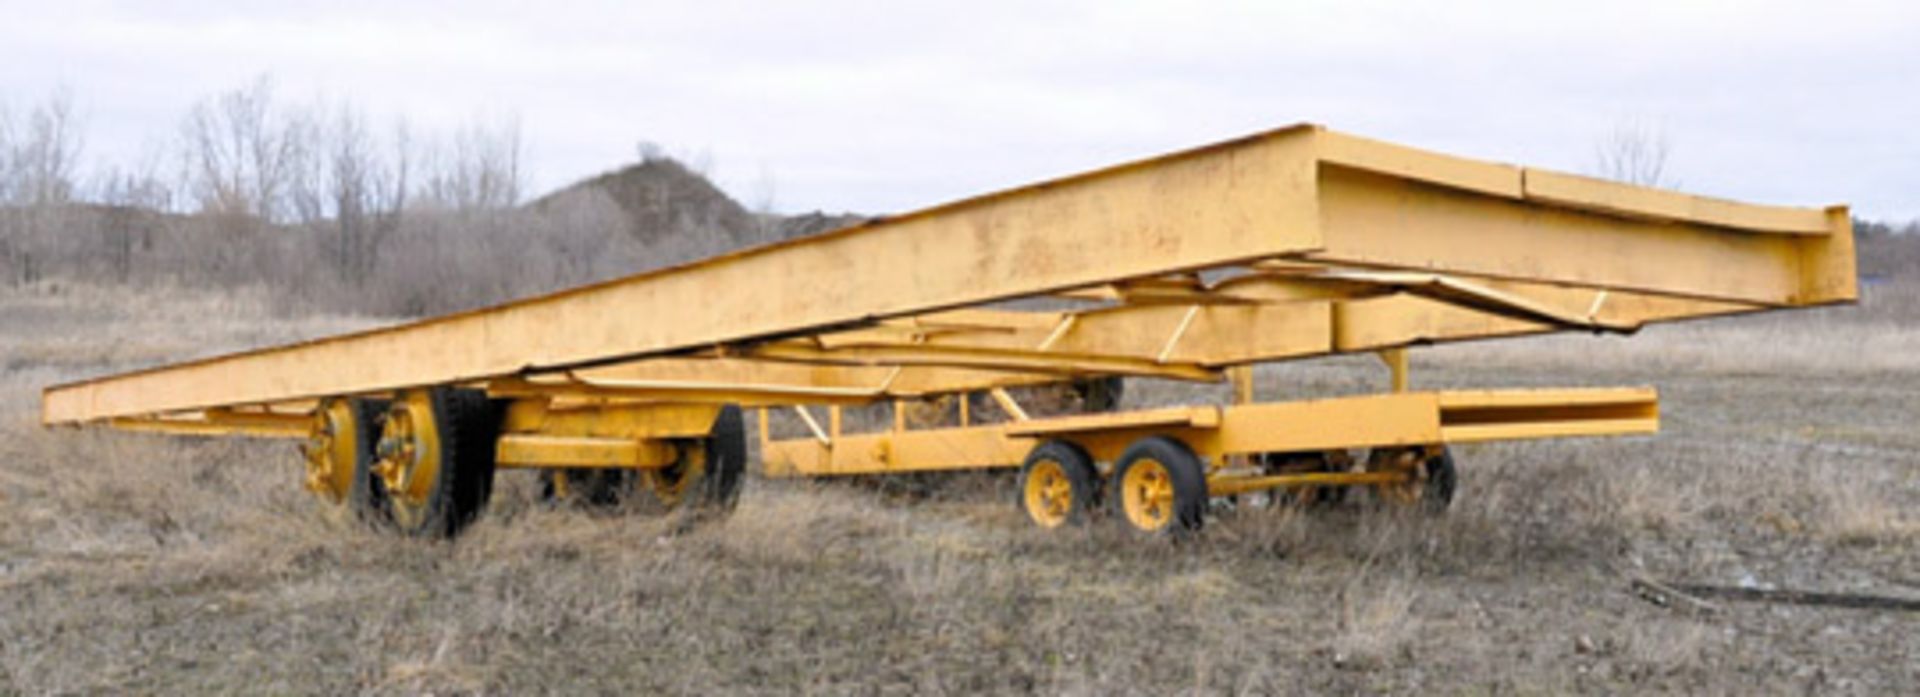 8' X 48' Tandem Axle Trailer - Image 2 of 3